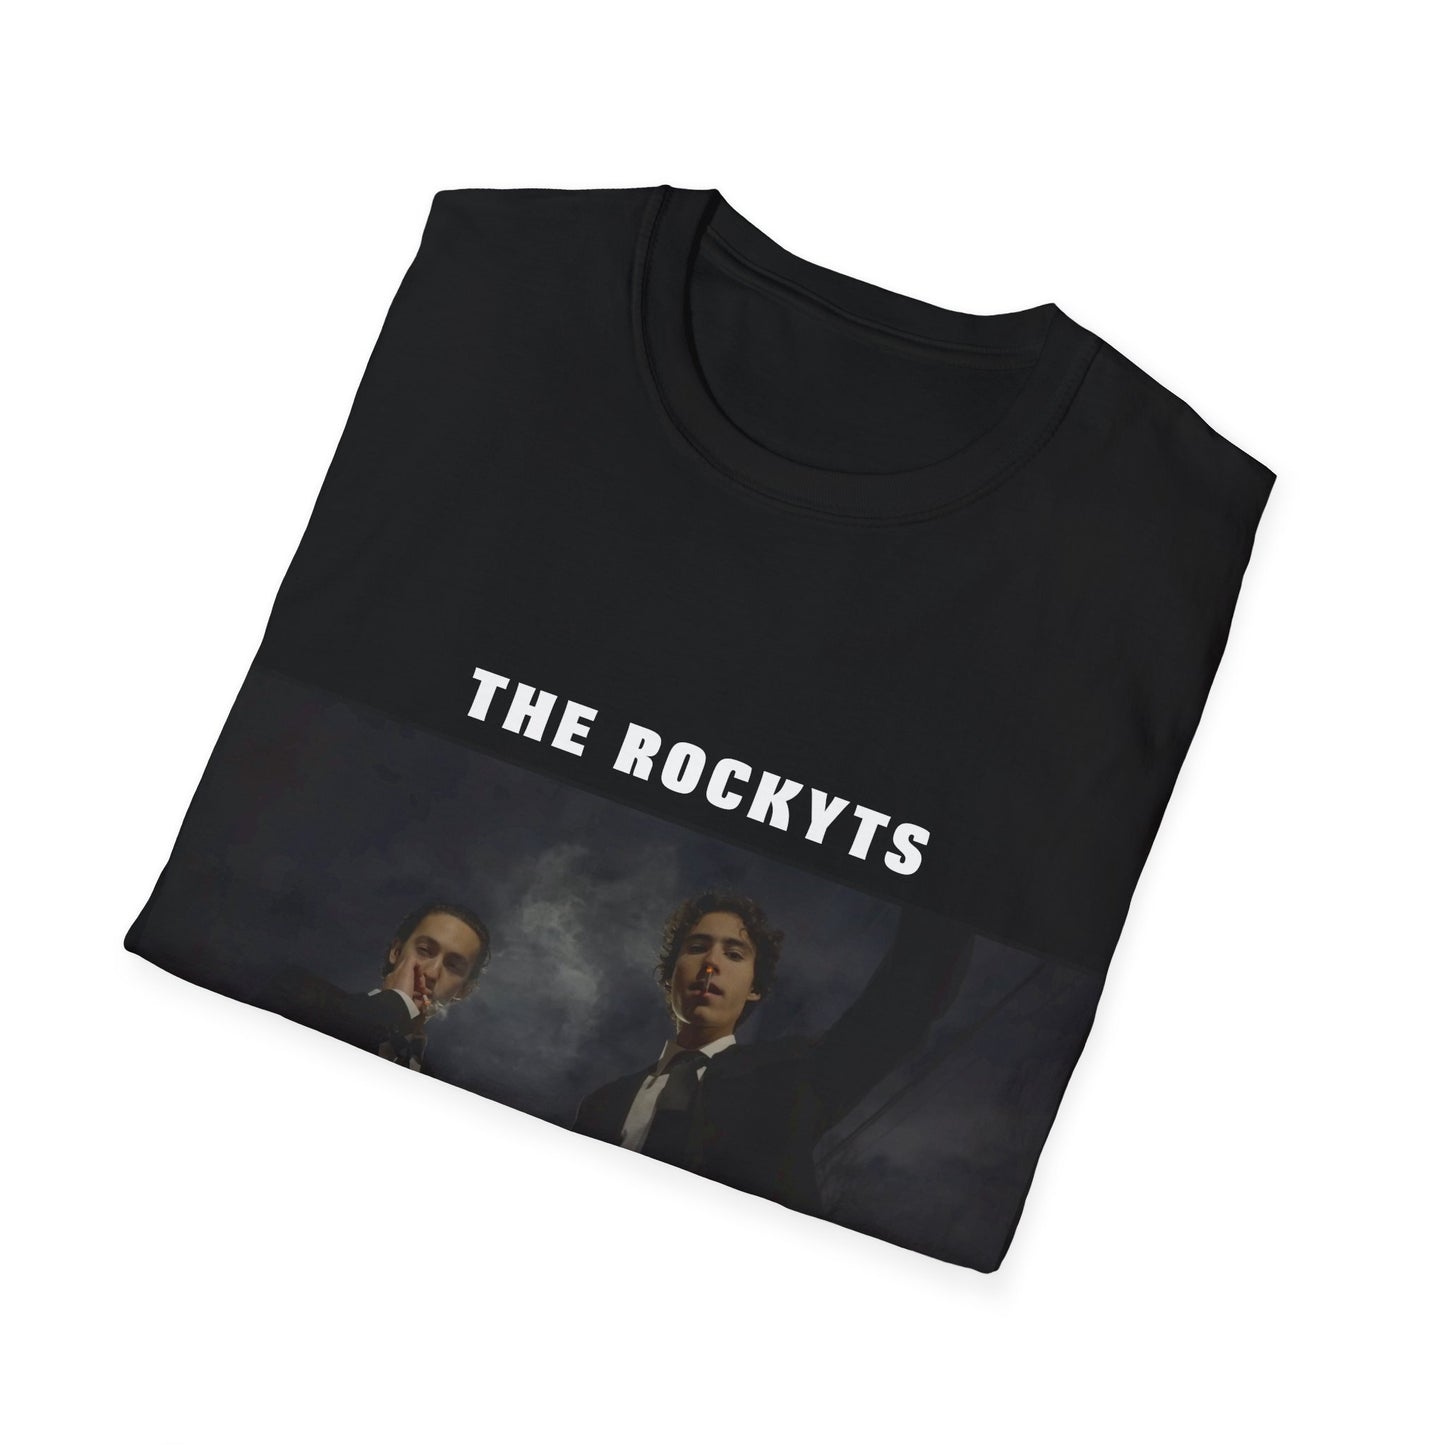 "The Cleaners" Tee